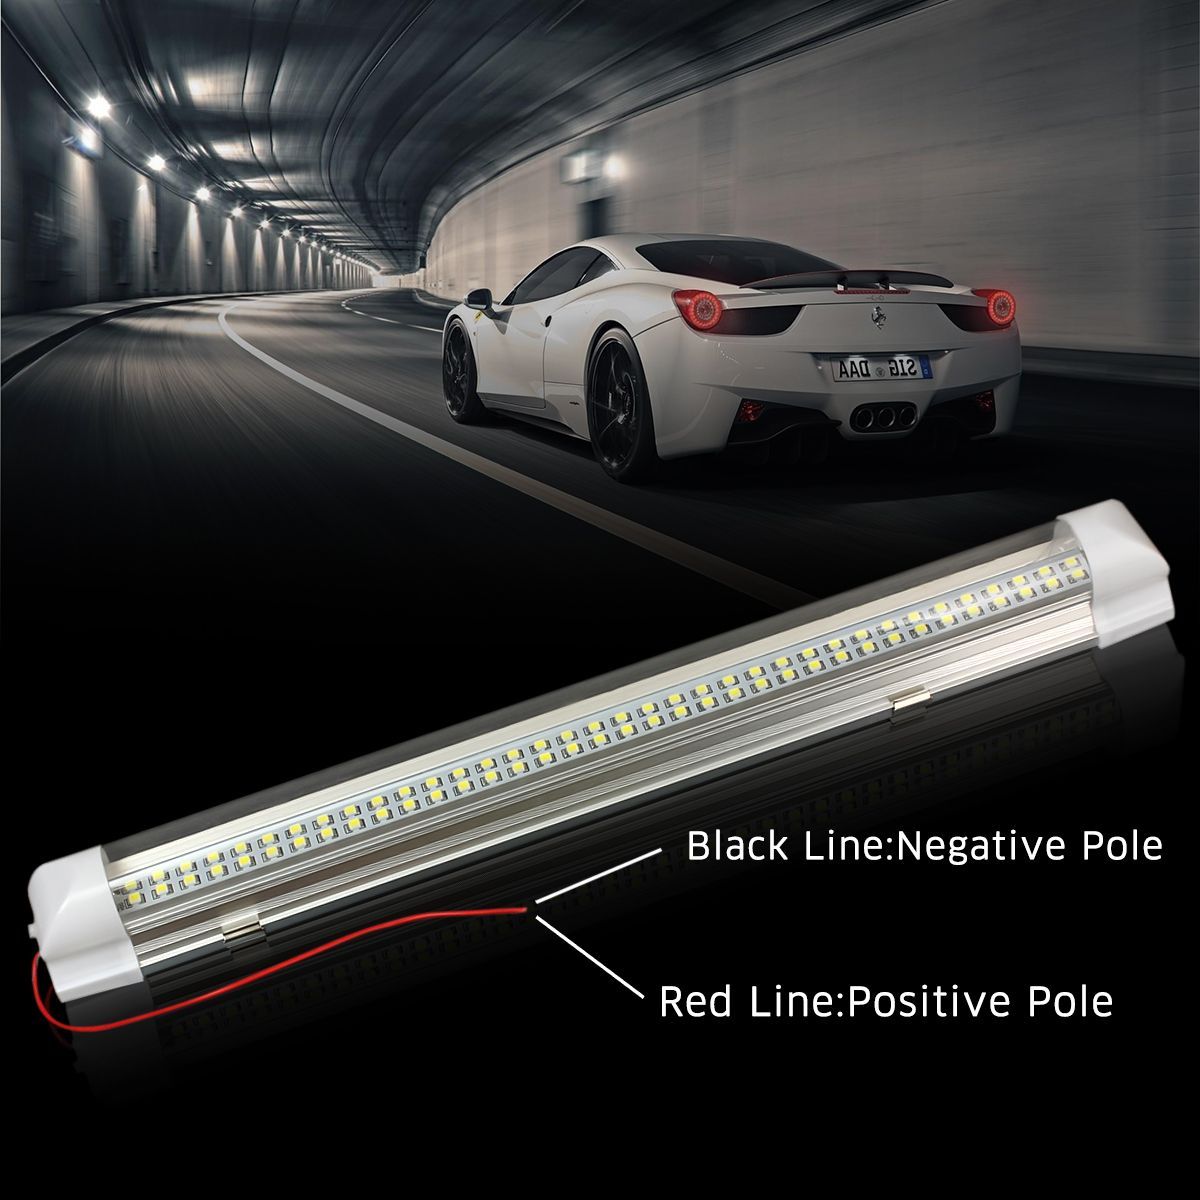 Universal-Interior-34cm-LED-Light-Strip-Lamp-White-with-ONOFF-Switch-1Pcs-for-Car-Auto-Caravan-Bus-1019239